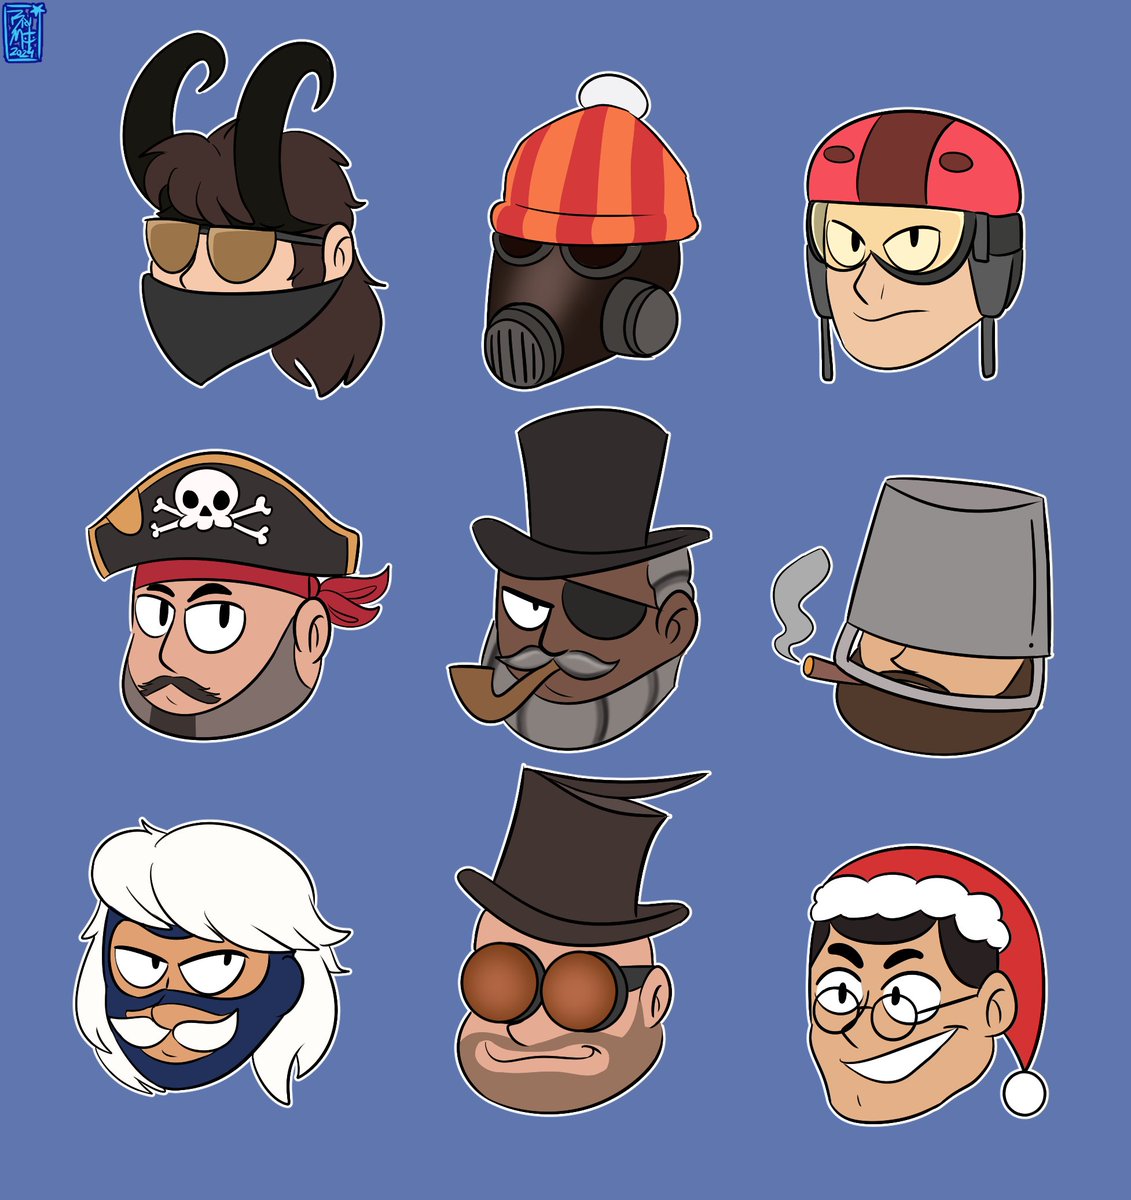 Commission for a friend on telegram of team fortress 2 icons. s Thank you so much! If you like my work, consider buying a commission! Ask for my price sheet on my DM's! #commissionsopen #artCommission #commission #teamfortress2 #cartoon #fanart